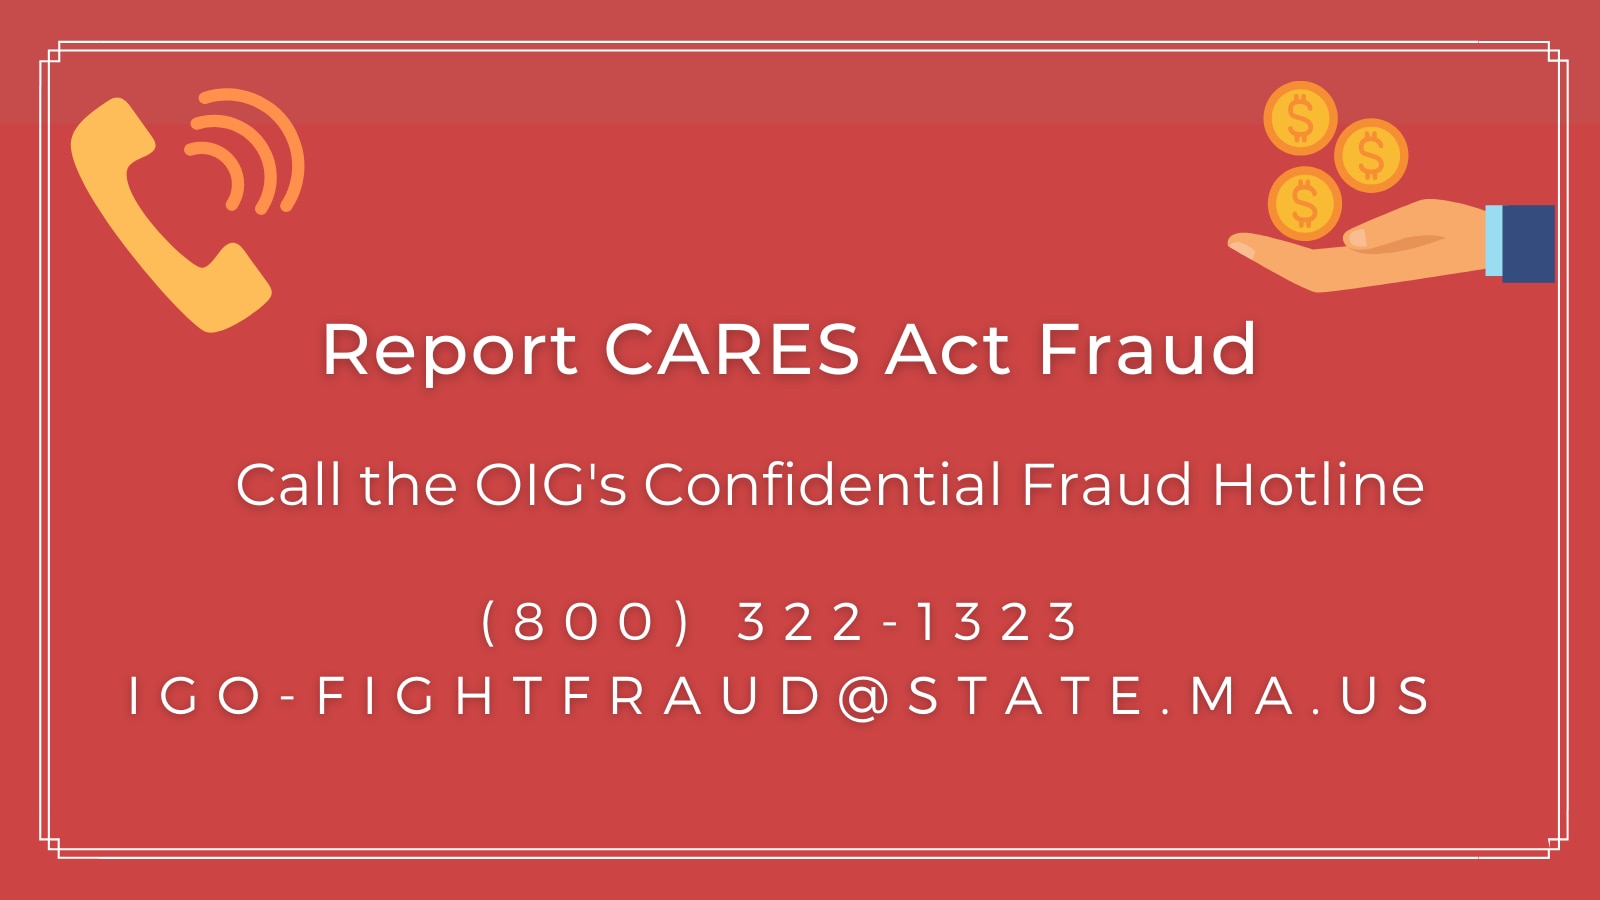 How to report CARES Act fraud